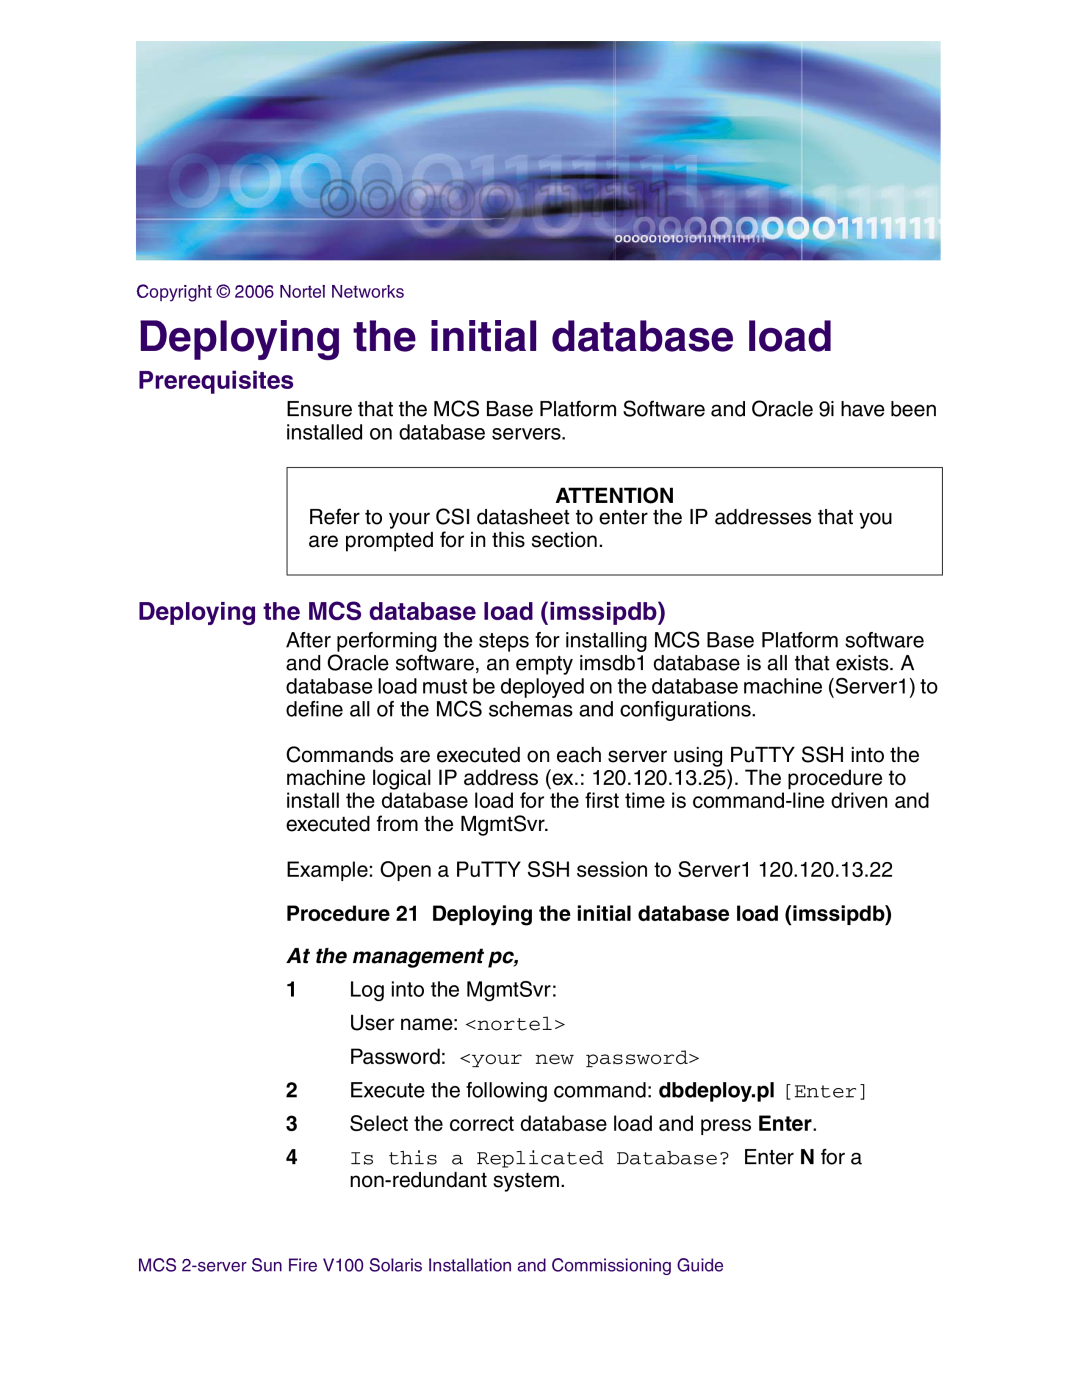 Nortel Networks V100 manual Deploying the initial database load, Deploying the MCS database load imssipdb, Prerequisites 